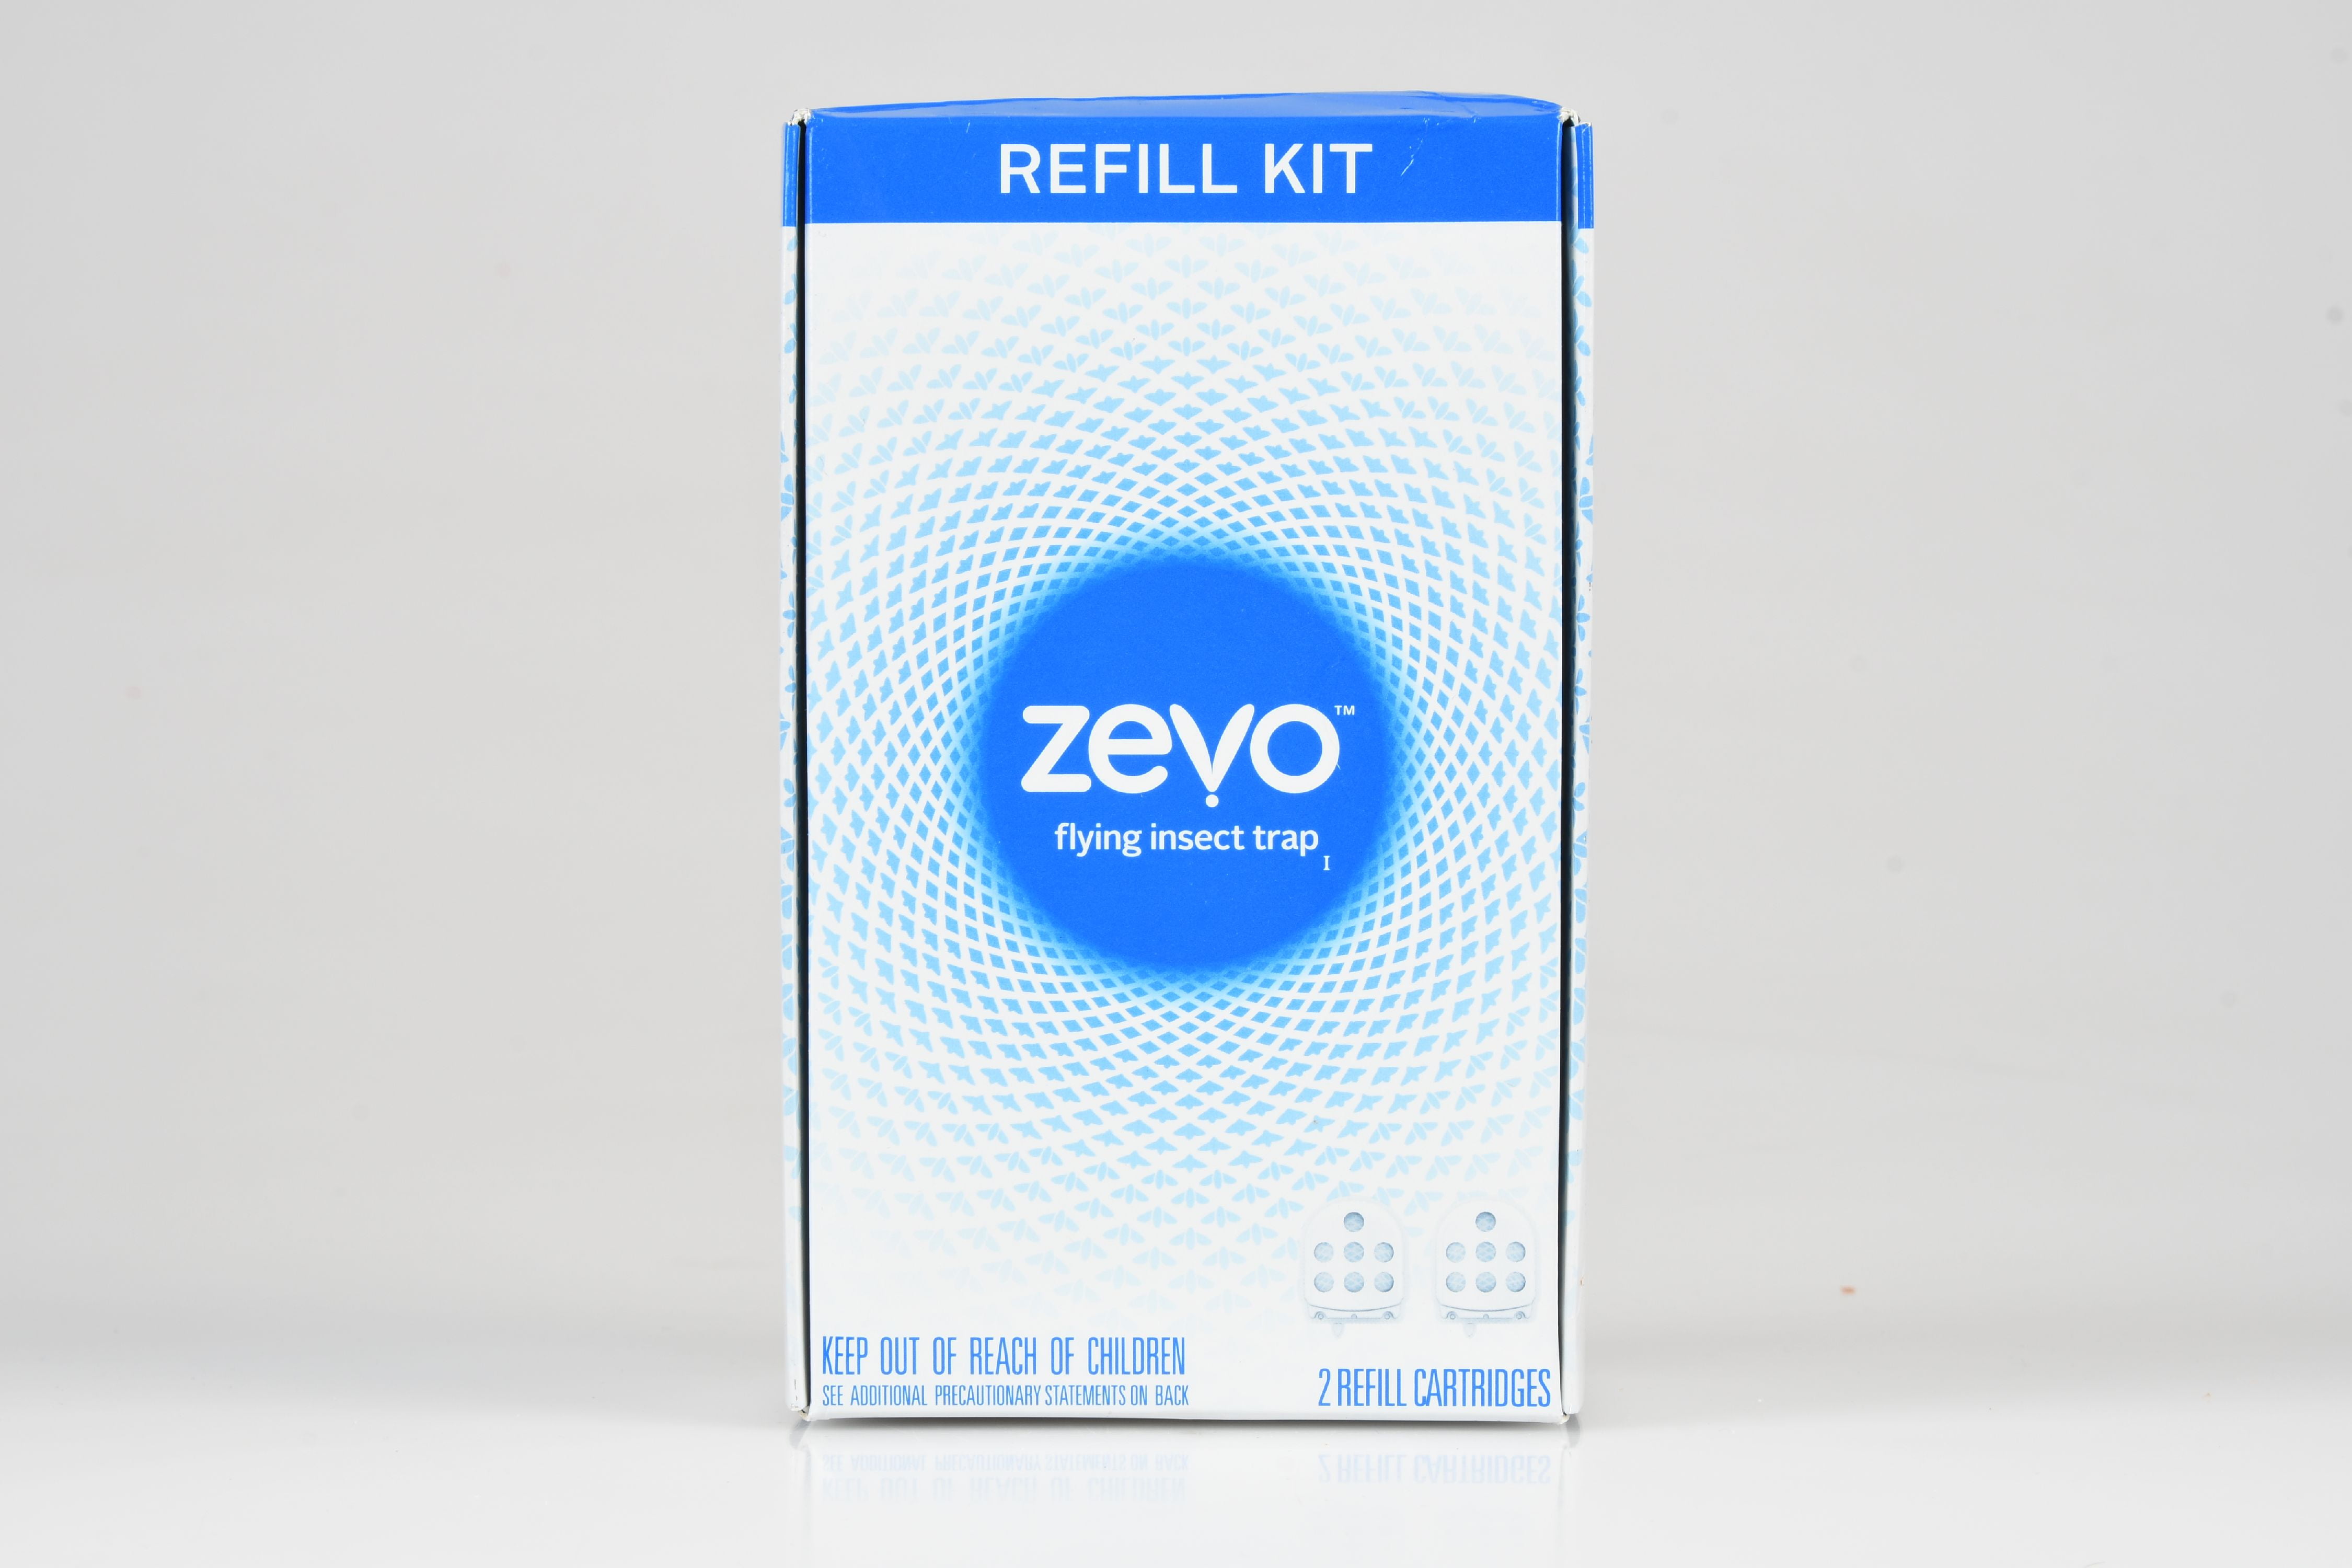 ZEVO Refills 02 Cartridges | Device Sold Separately, White, ZEVO Flying  Insect Trap Refill Fly Trap Refill Cartridges + Includes Exclusive